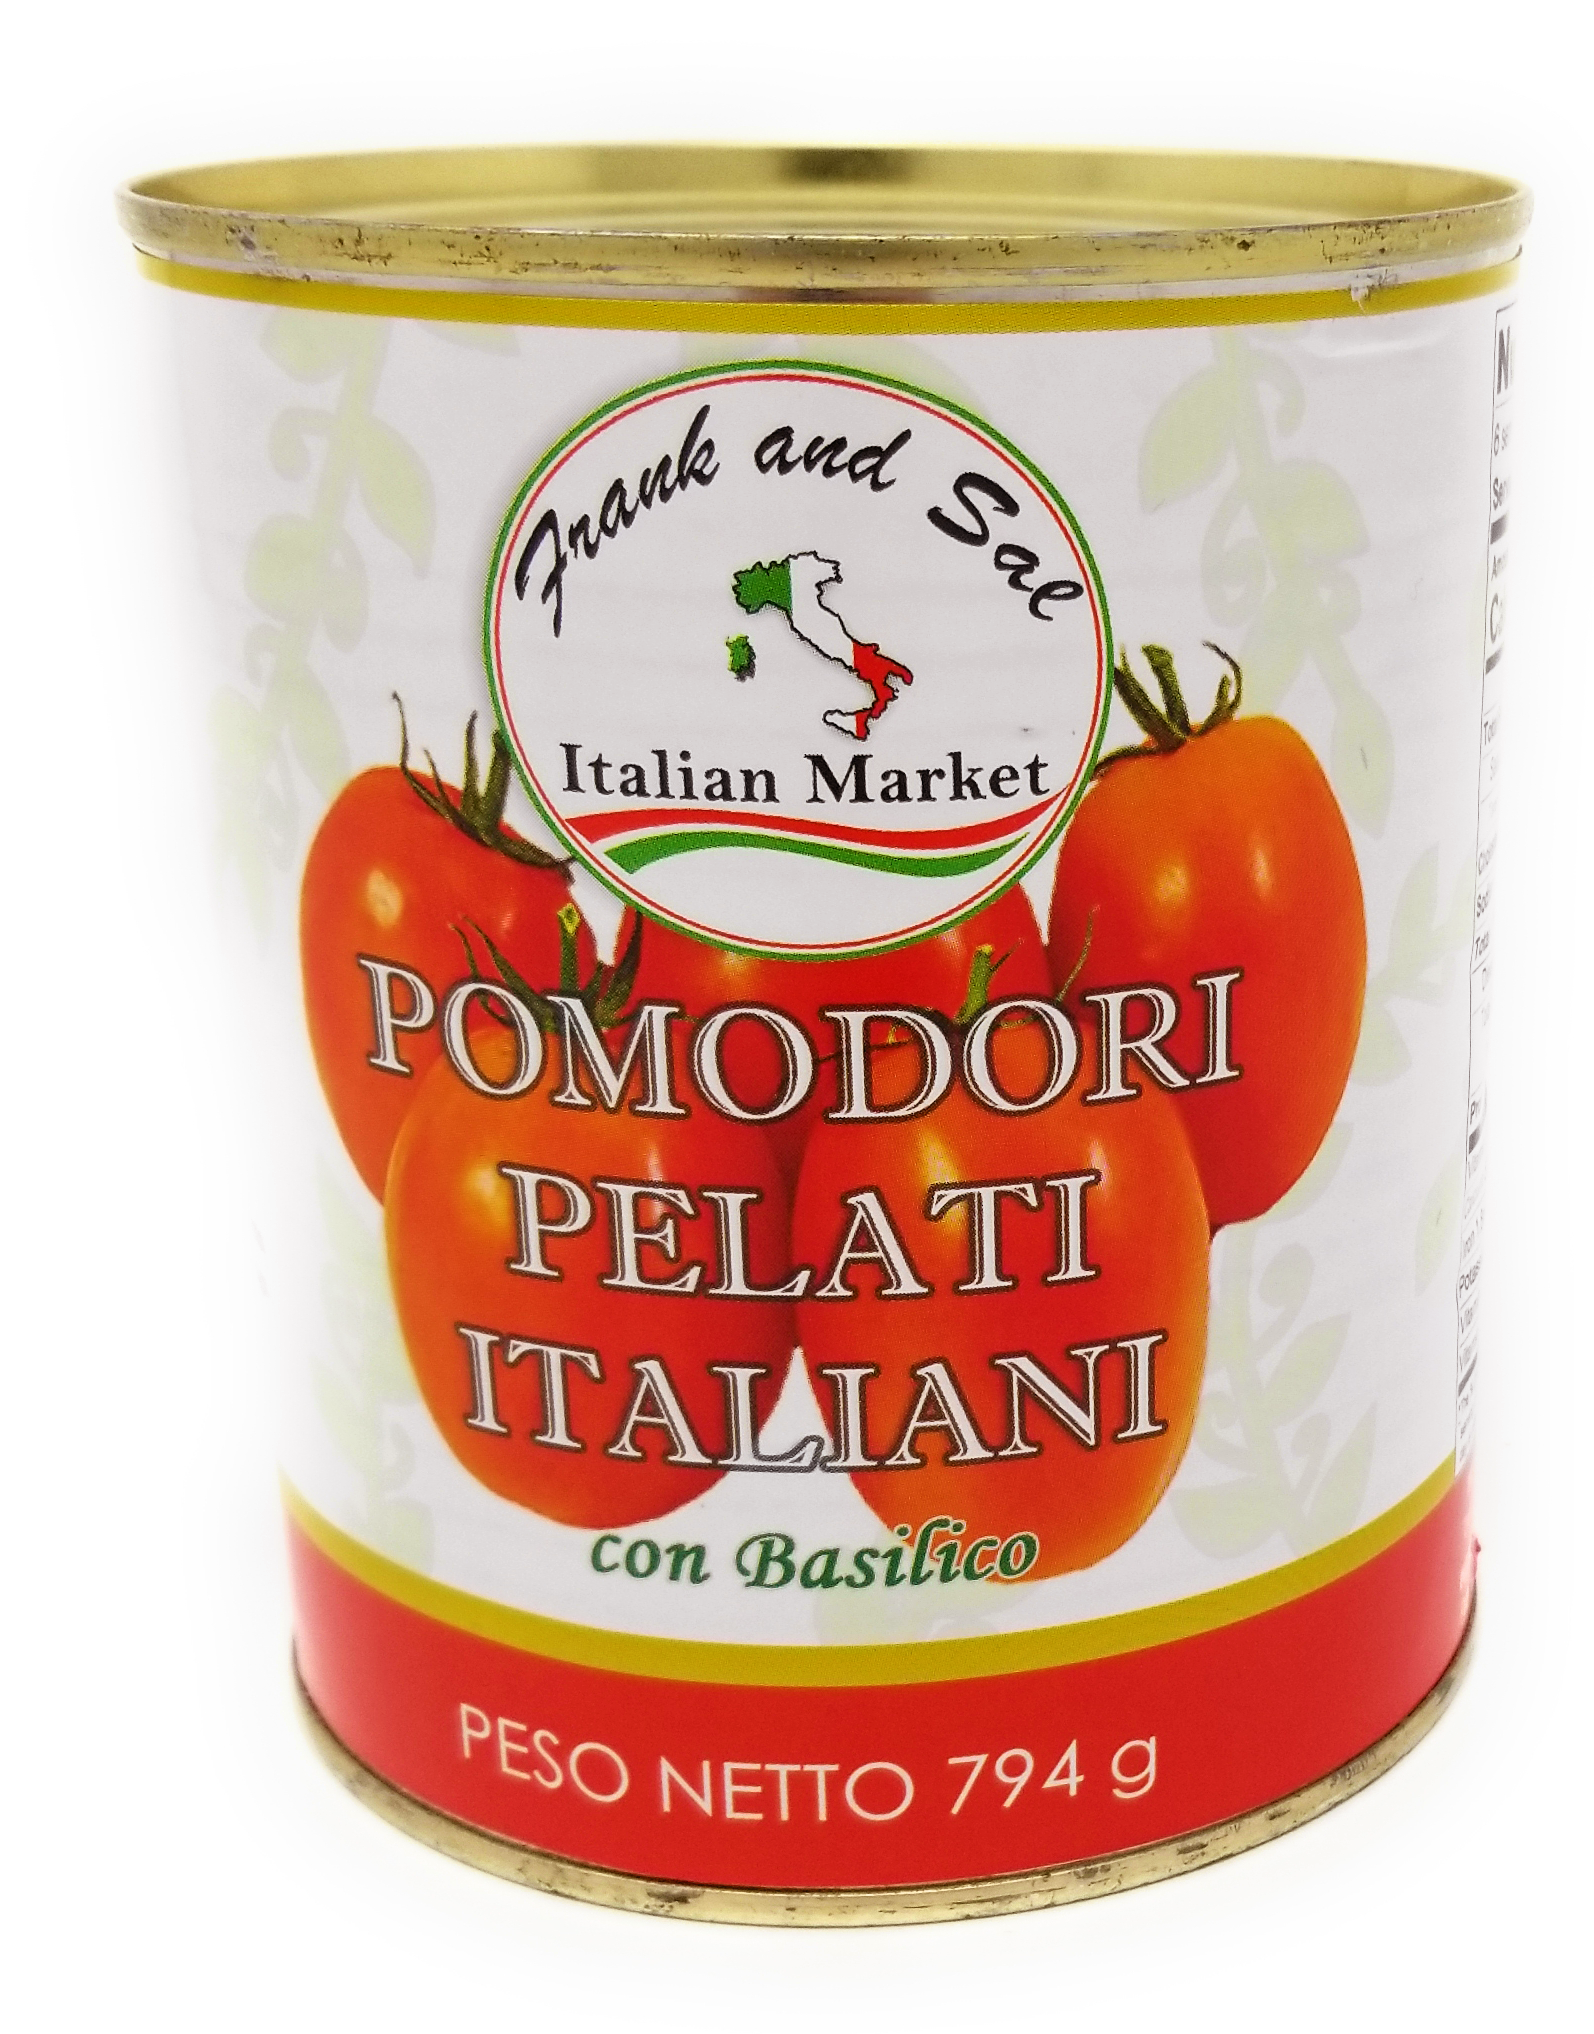 Whole Peeled Italian Tomatoes With Basil - All Natural Product of Italy - 3 Easy to Open Pull top 28 ounce Cans - Kosher